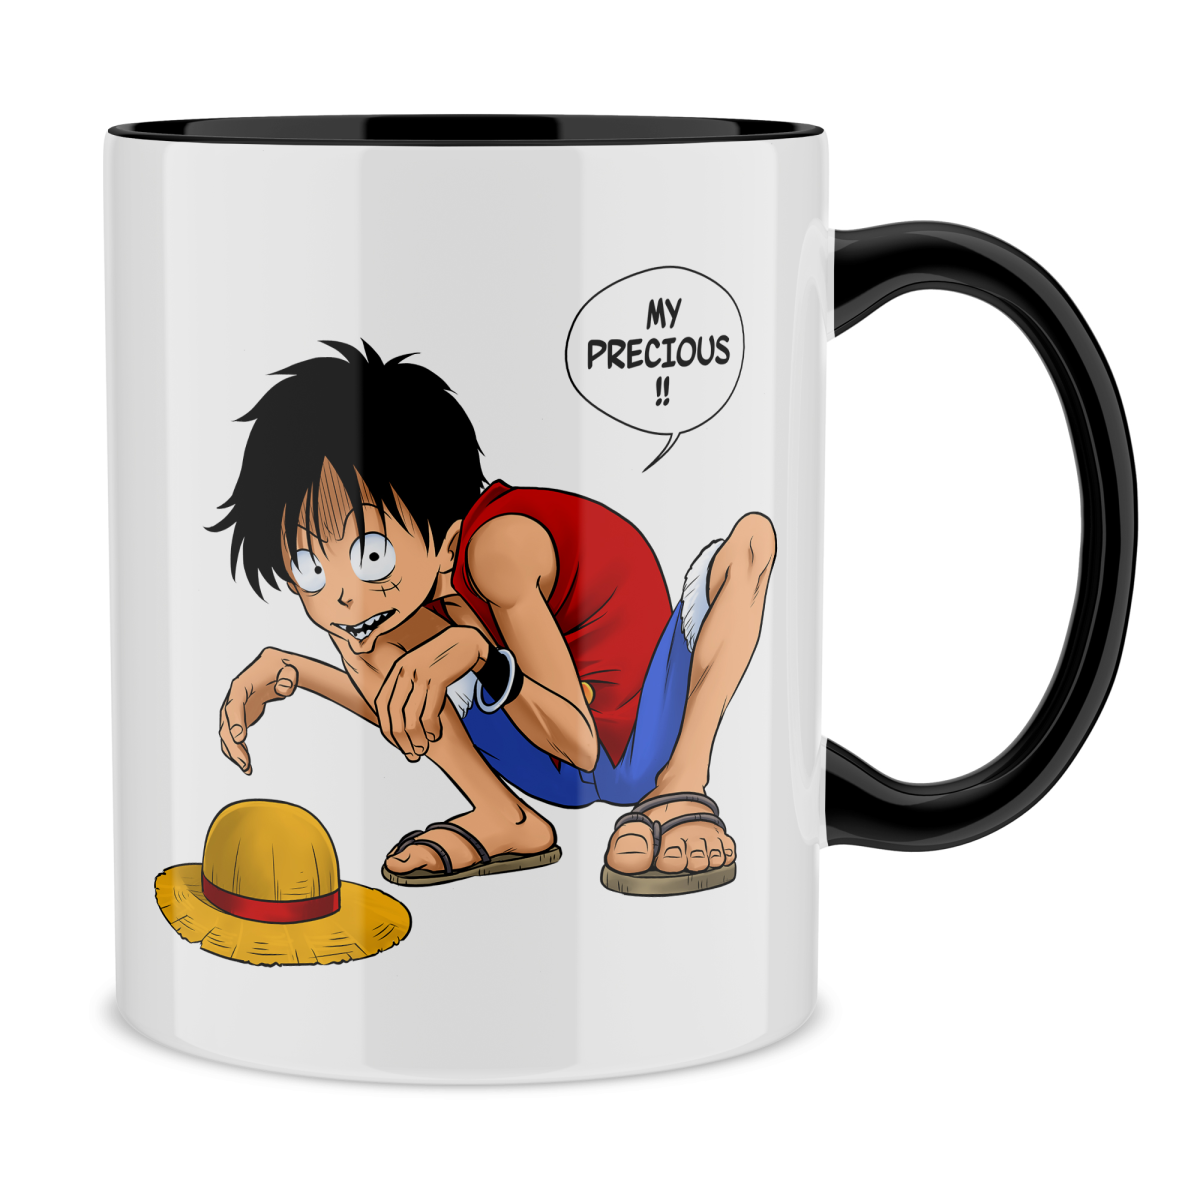 Funny One Piece The Lord Of The Rings Mug Monkey D Luffy And Gollum One Piece The Lord Of The Rings Parody Ref 744